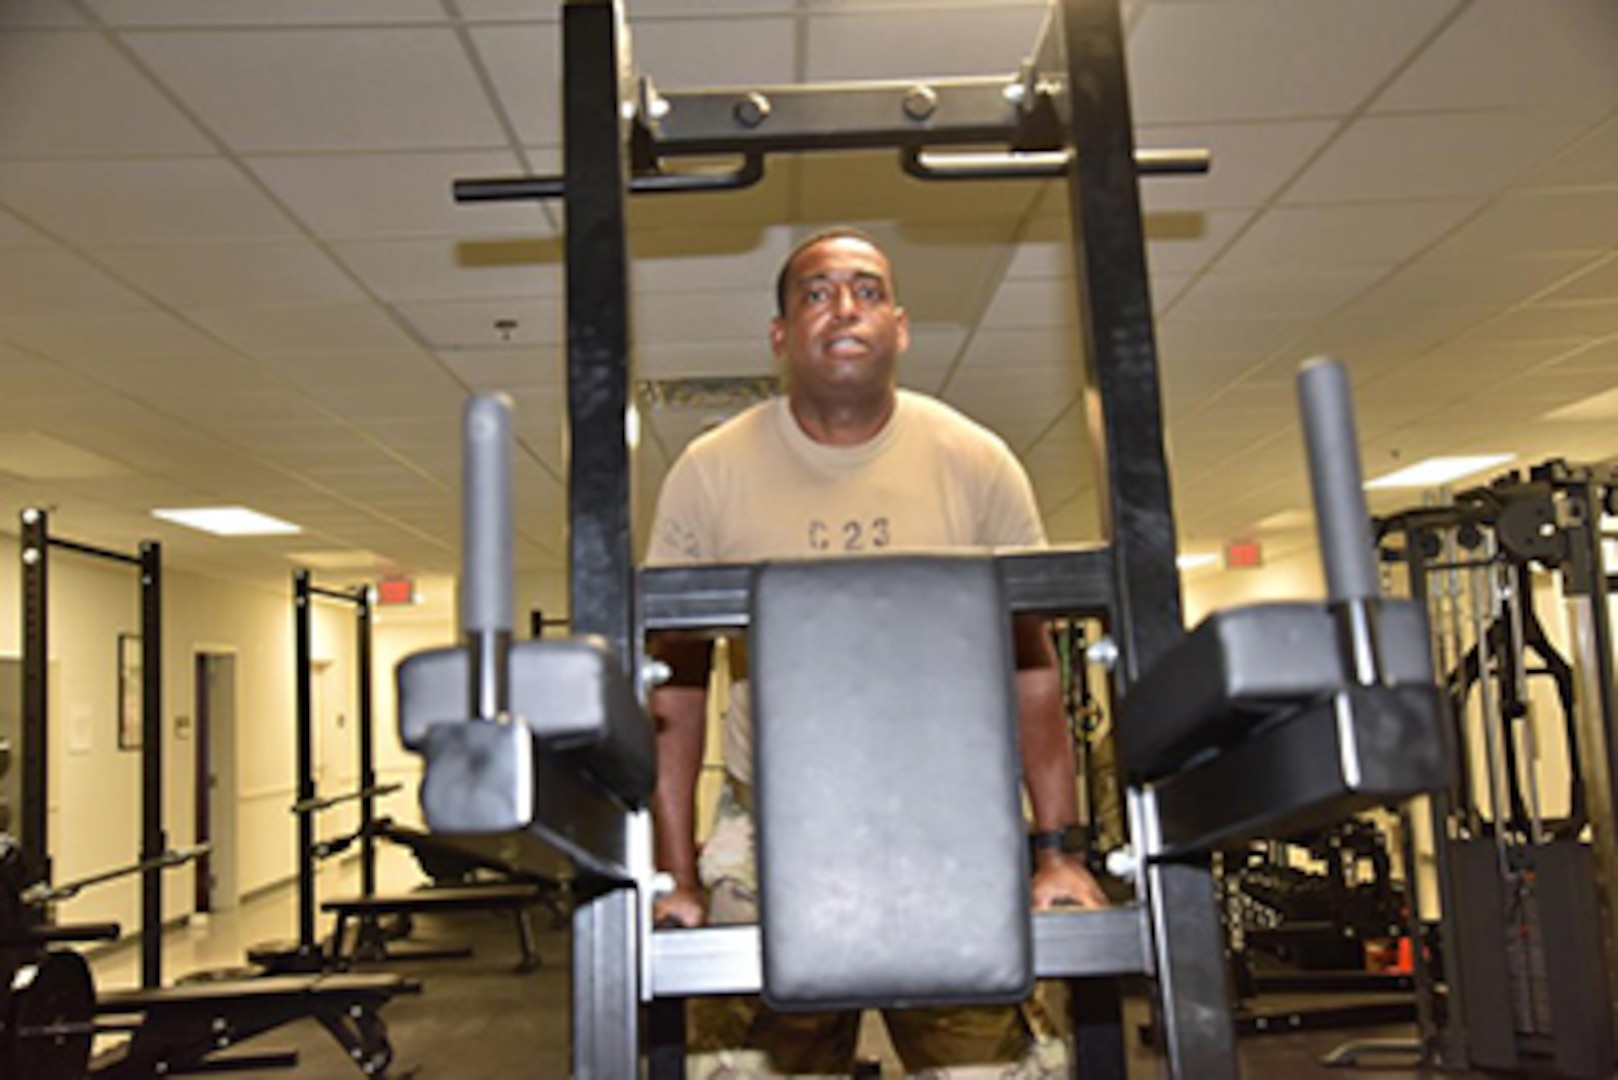 U. S. Army Sgt. Joshua Holloway, doing a pull-up exercise at the Fort Bragg, North Carolina, Soldier Recovery Unit Gym on July 14, 2022.